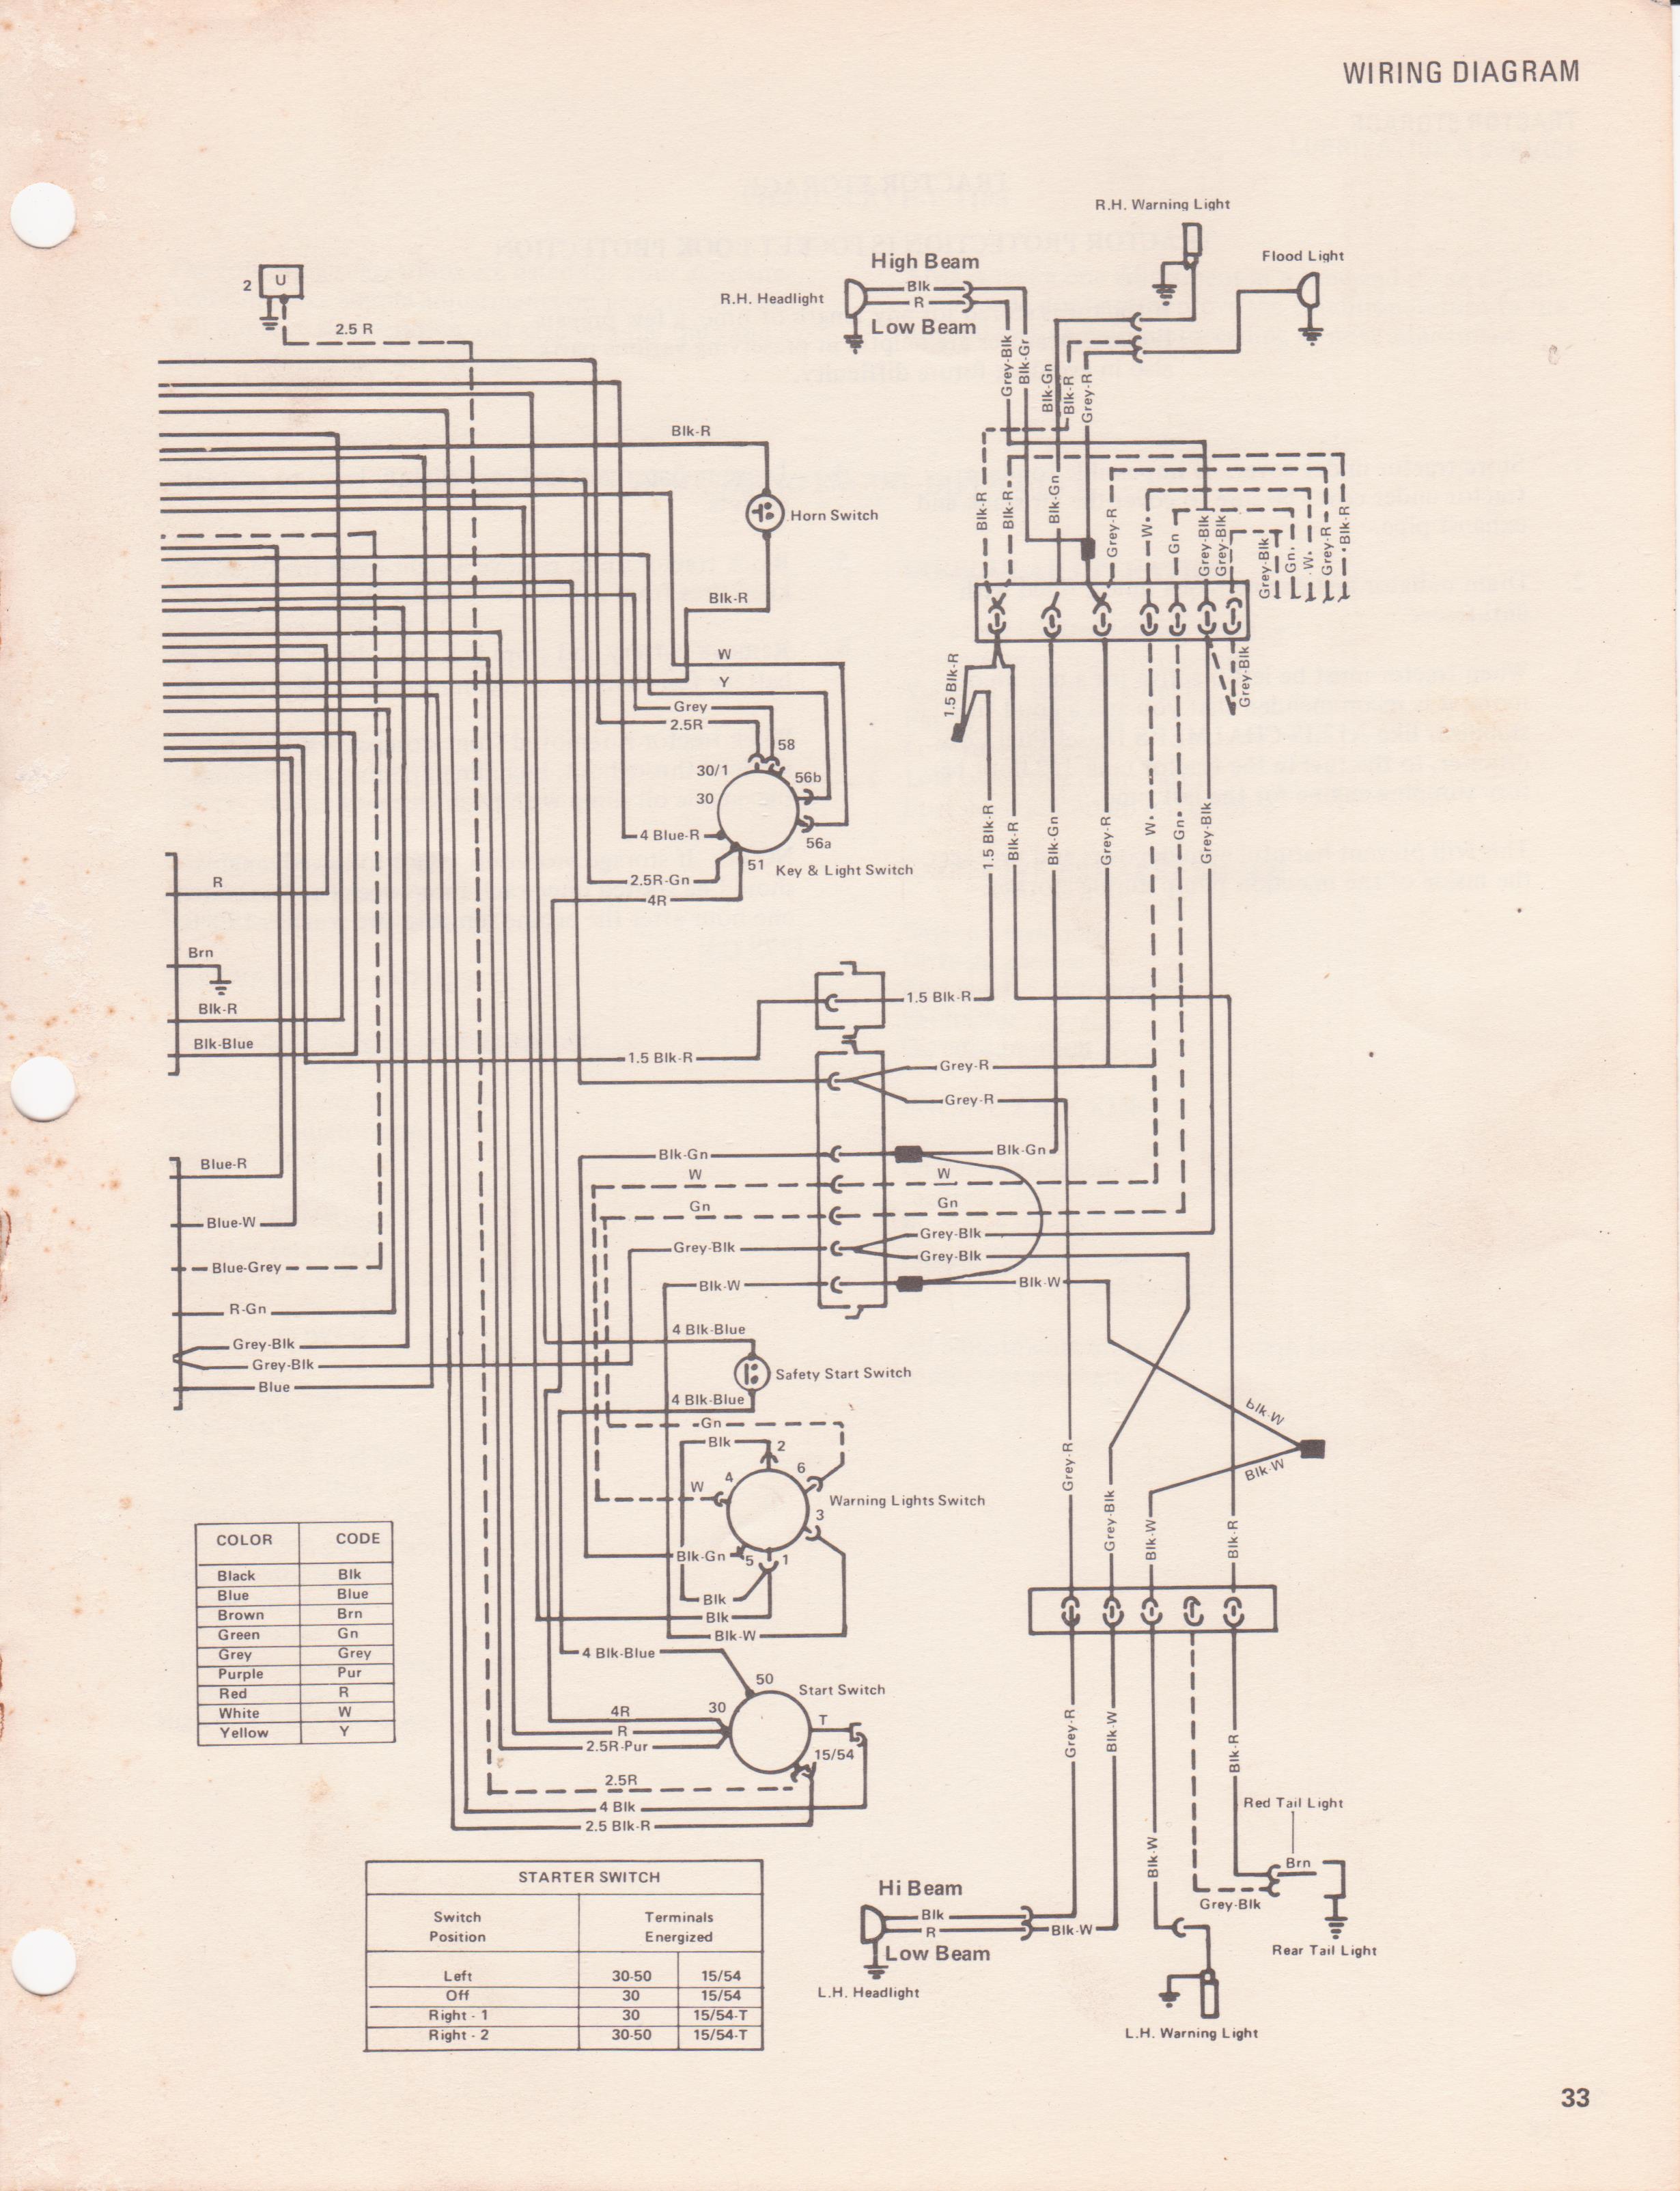 Allis Chalmers D14 5 Prong 6 Volt Ignition Switch Wiring Diagram from www.allischalmers.com